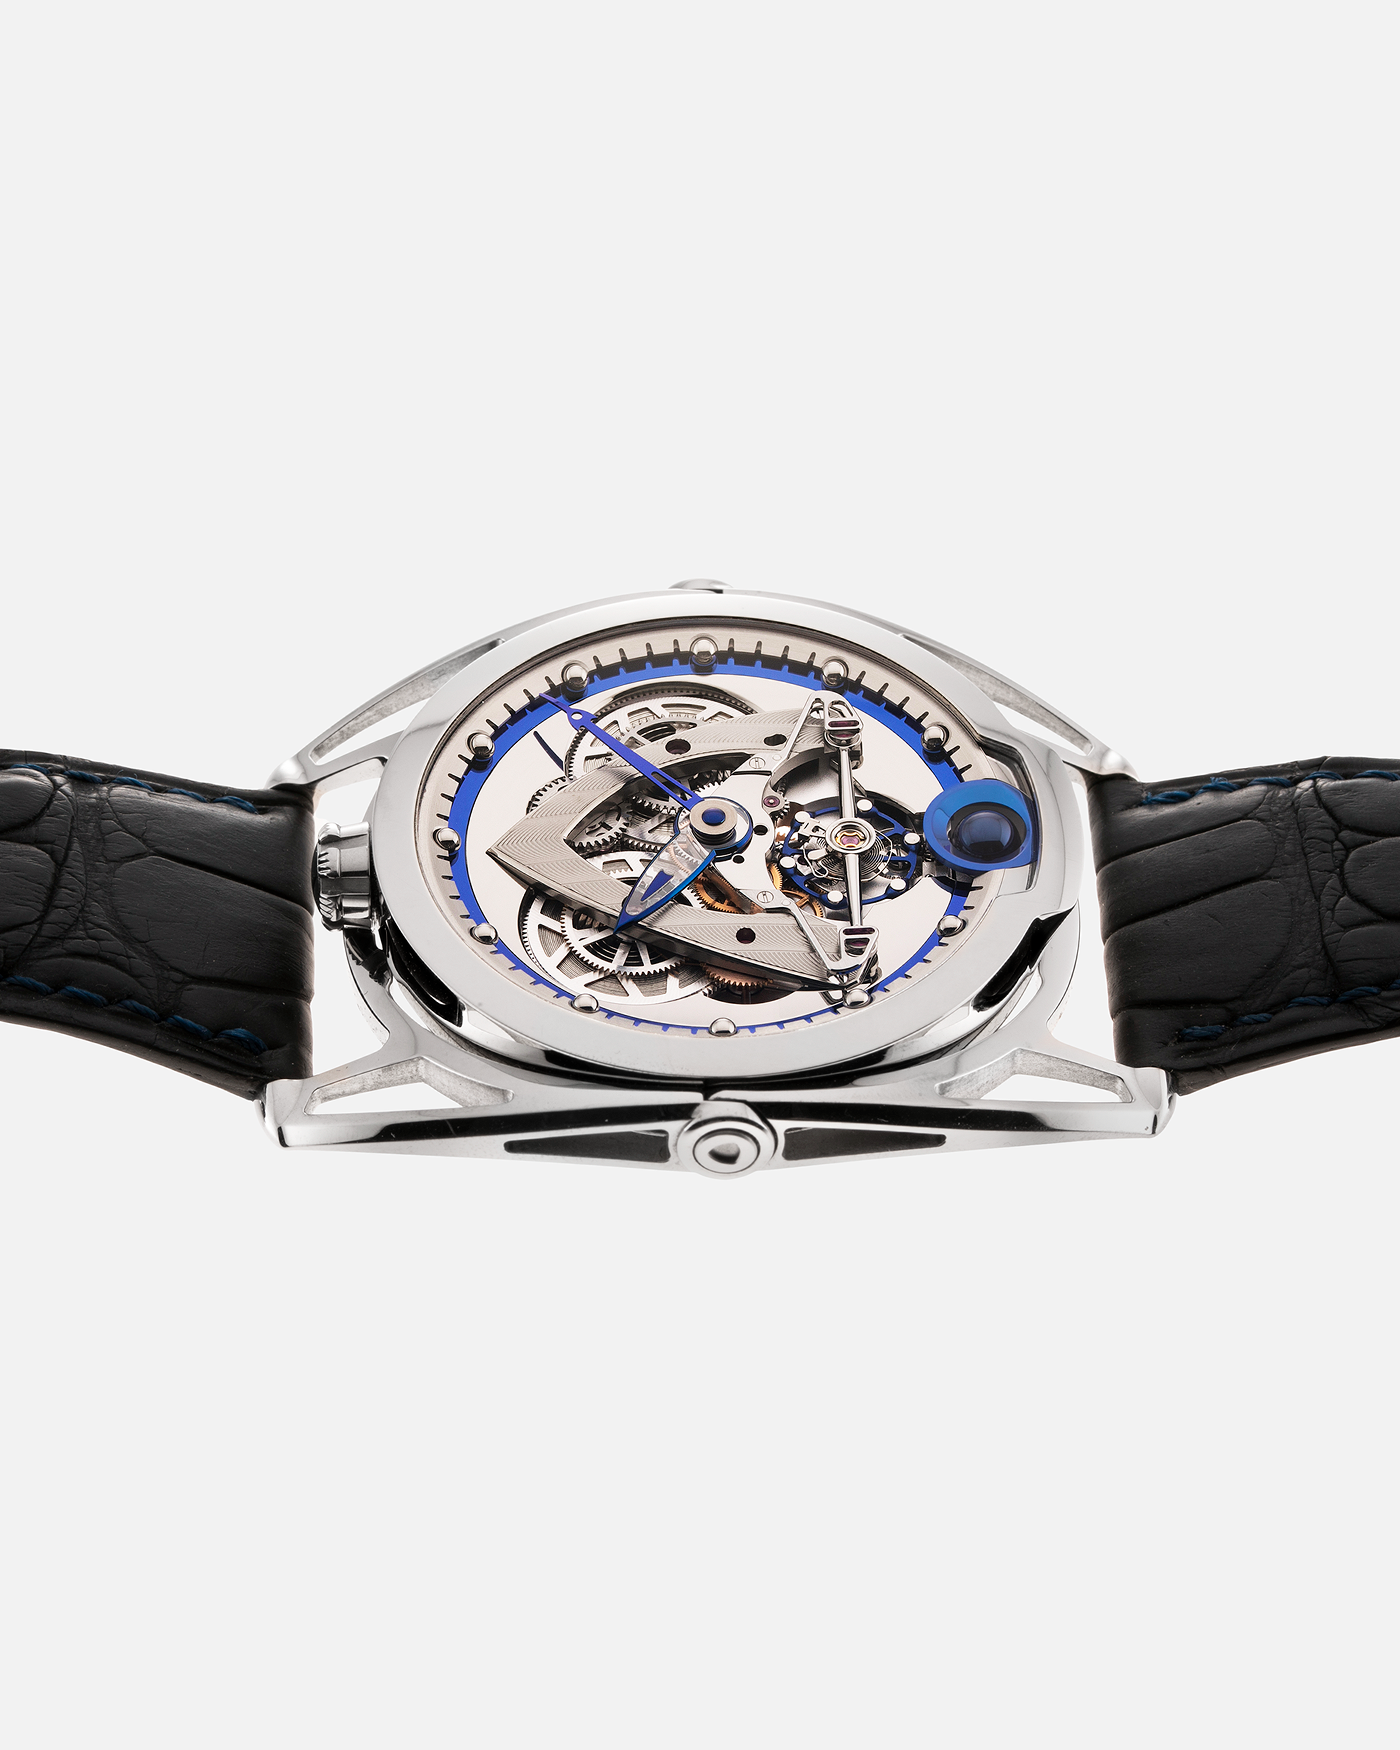 Brand: De Bethune Year: 2020 Model: Steel Wheels Reference: DB28 Material: Titanium Movement: In-House Cal. DB2115V4 Case Diameter: 42.6mm Strap: De Bethune Dark Blue Alligator with Titanium Tang Buckle 